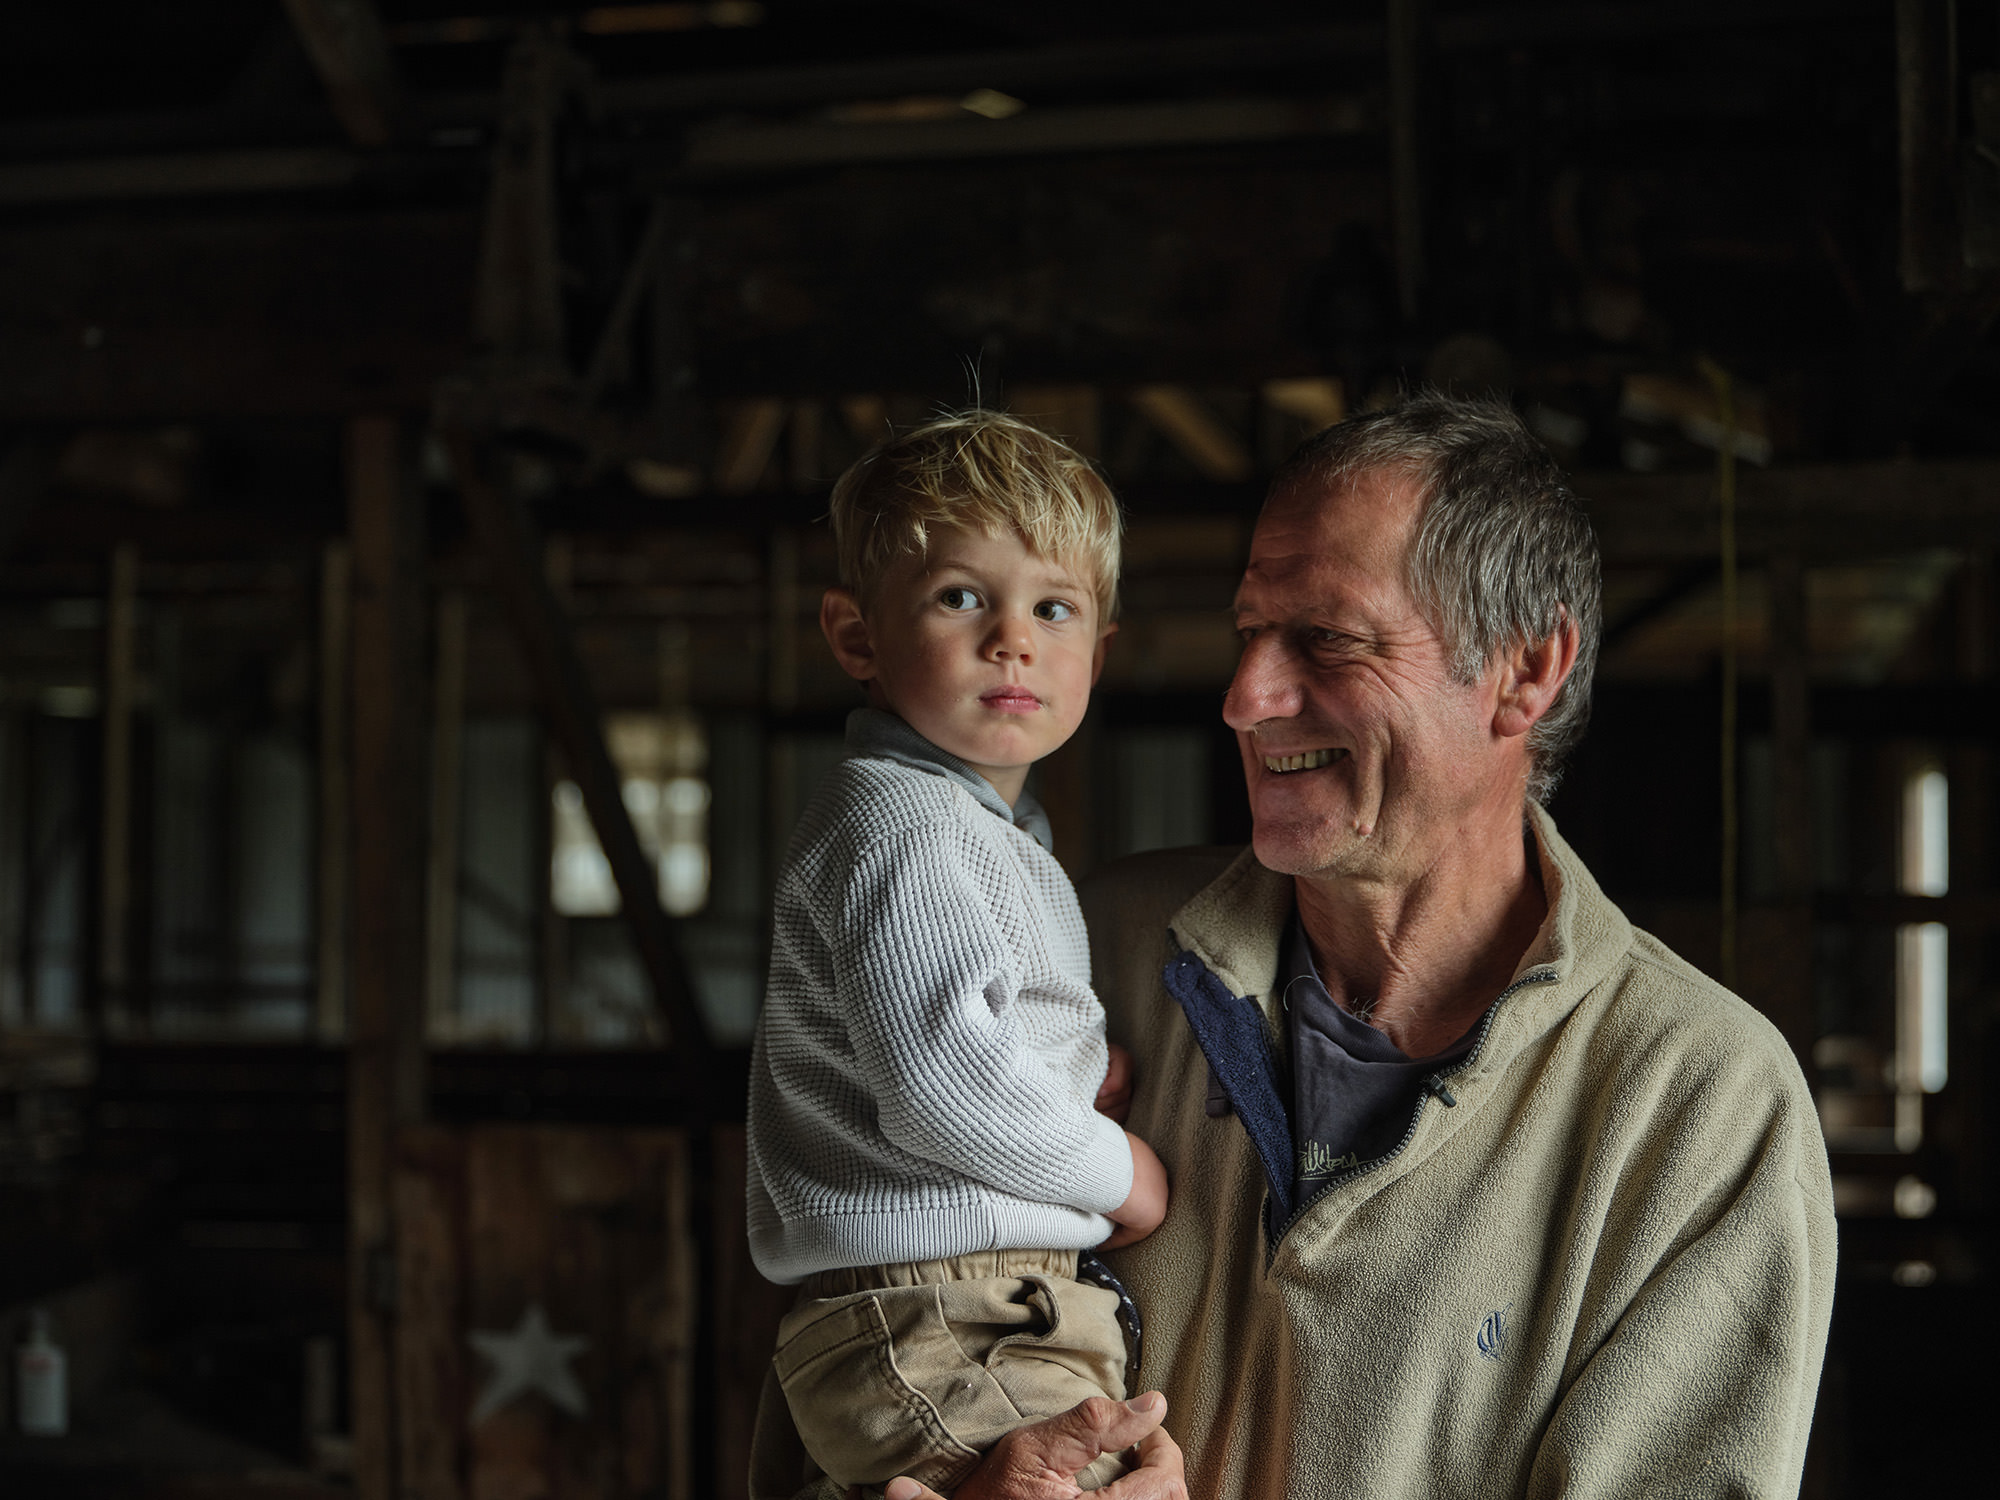 Shane Blundy from Cherry Tree Downs Organics and his grandson Charlie.